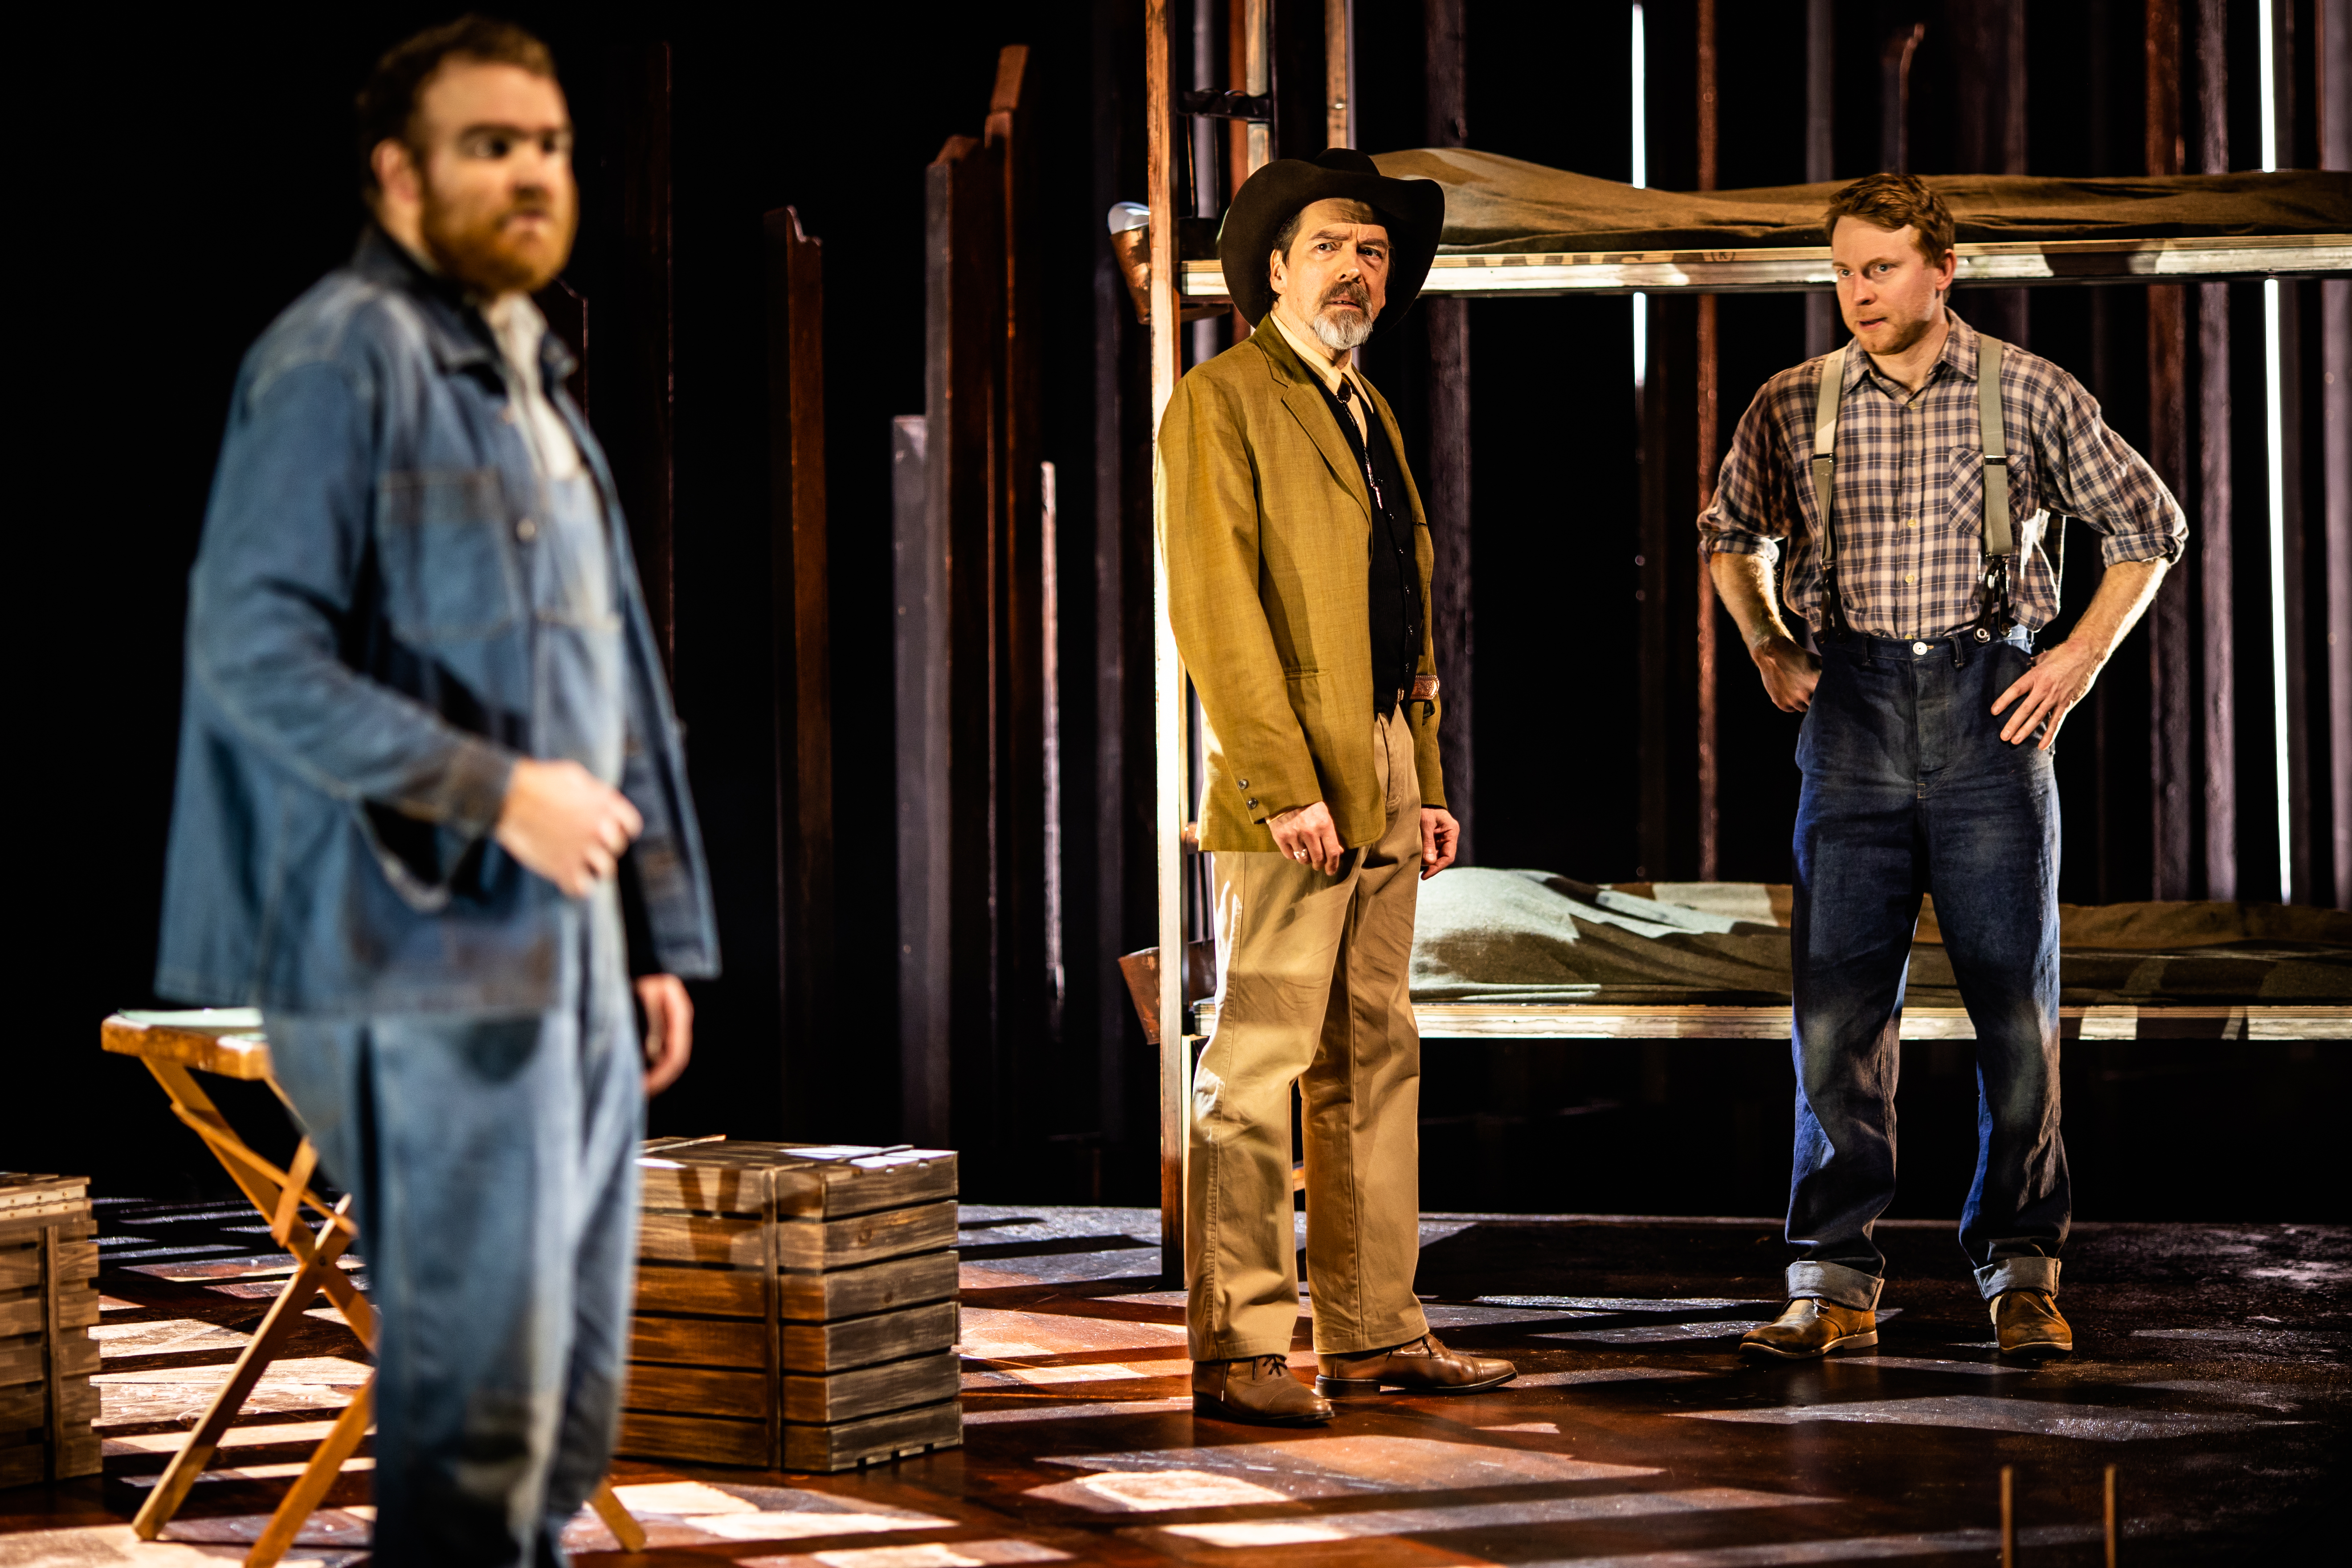 Wiliam Young as Lennie, James Clyde as The Boss, and Tom McCall as George